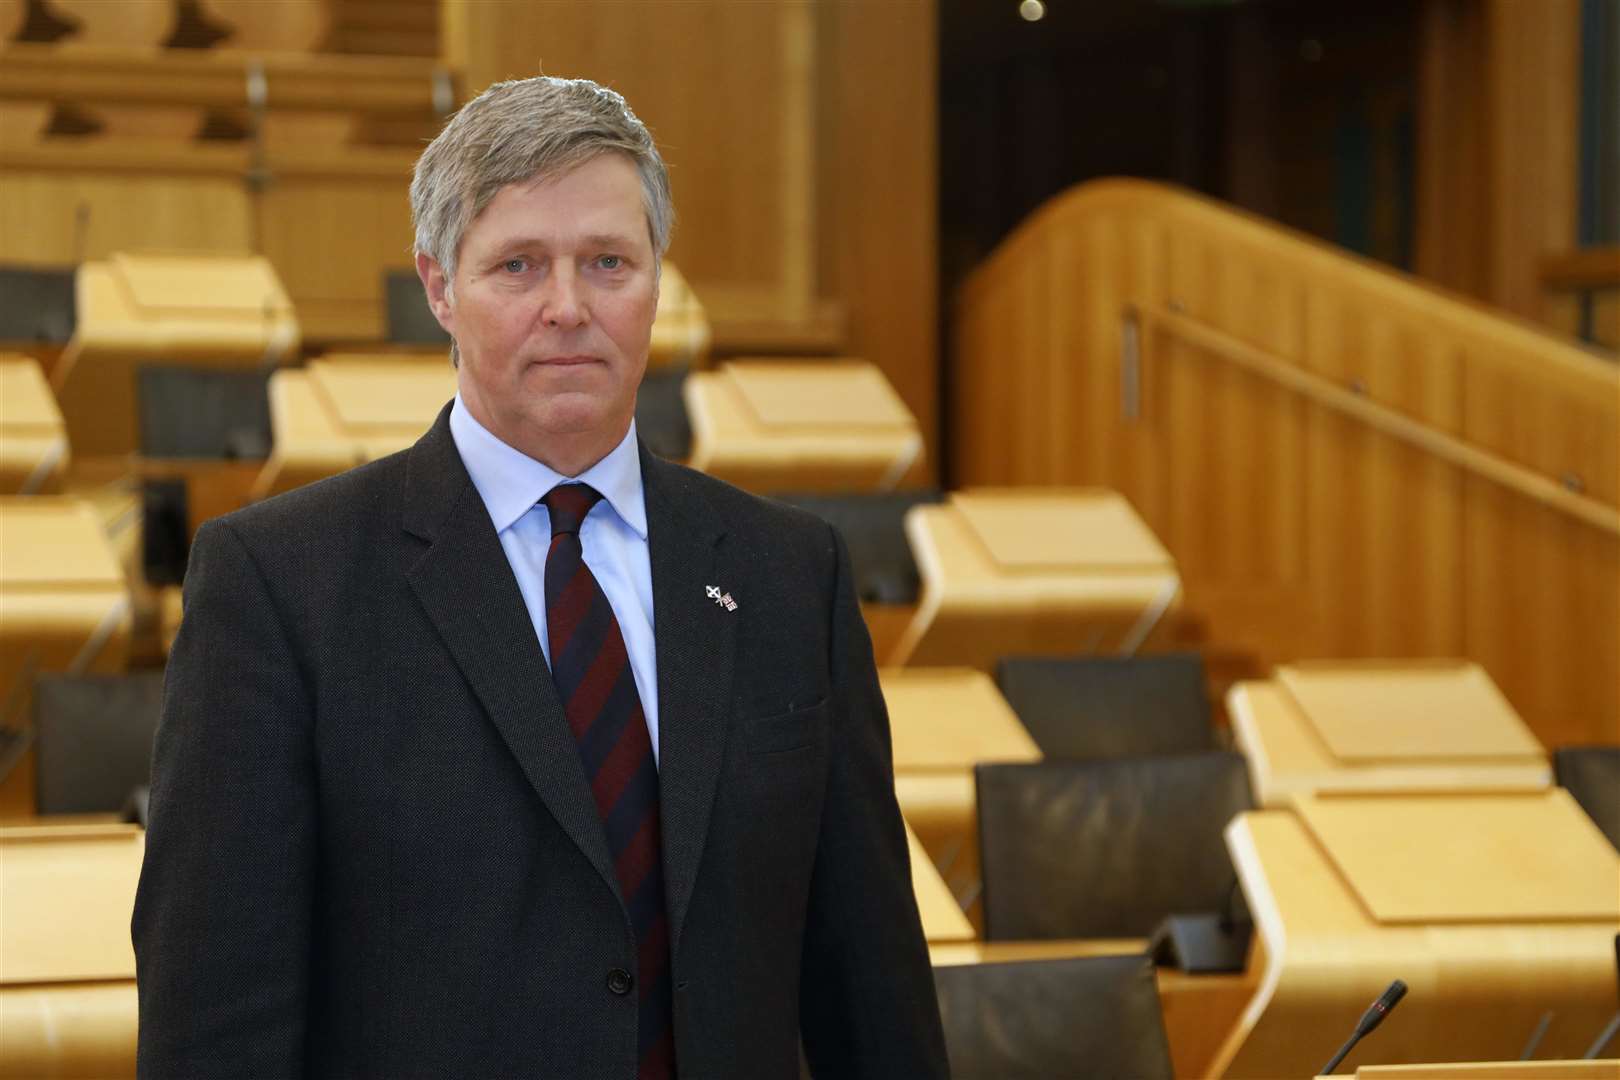 Edward Mountain MSP has laid out his thoughts on the way ahead for Cairngorm Mountain including responsibility for its management going to a Government arms-length holding company.